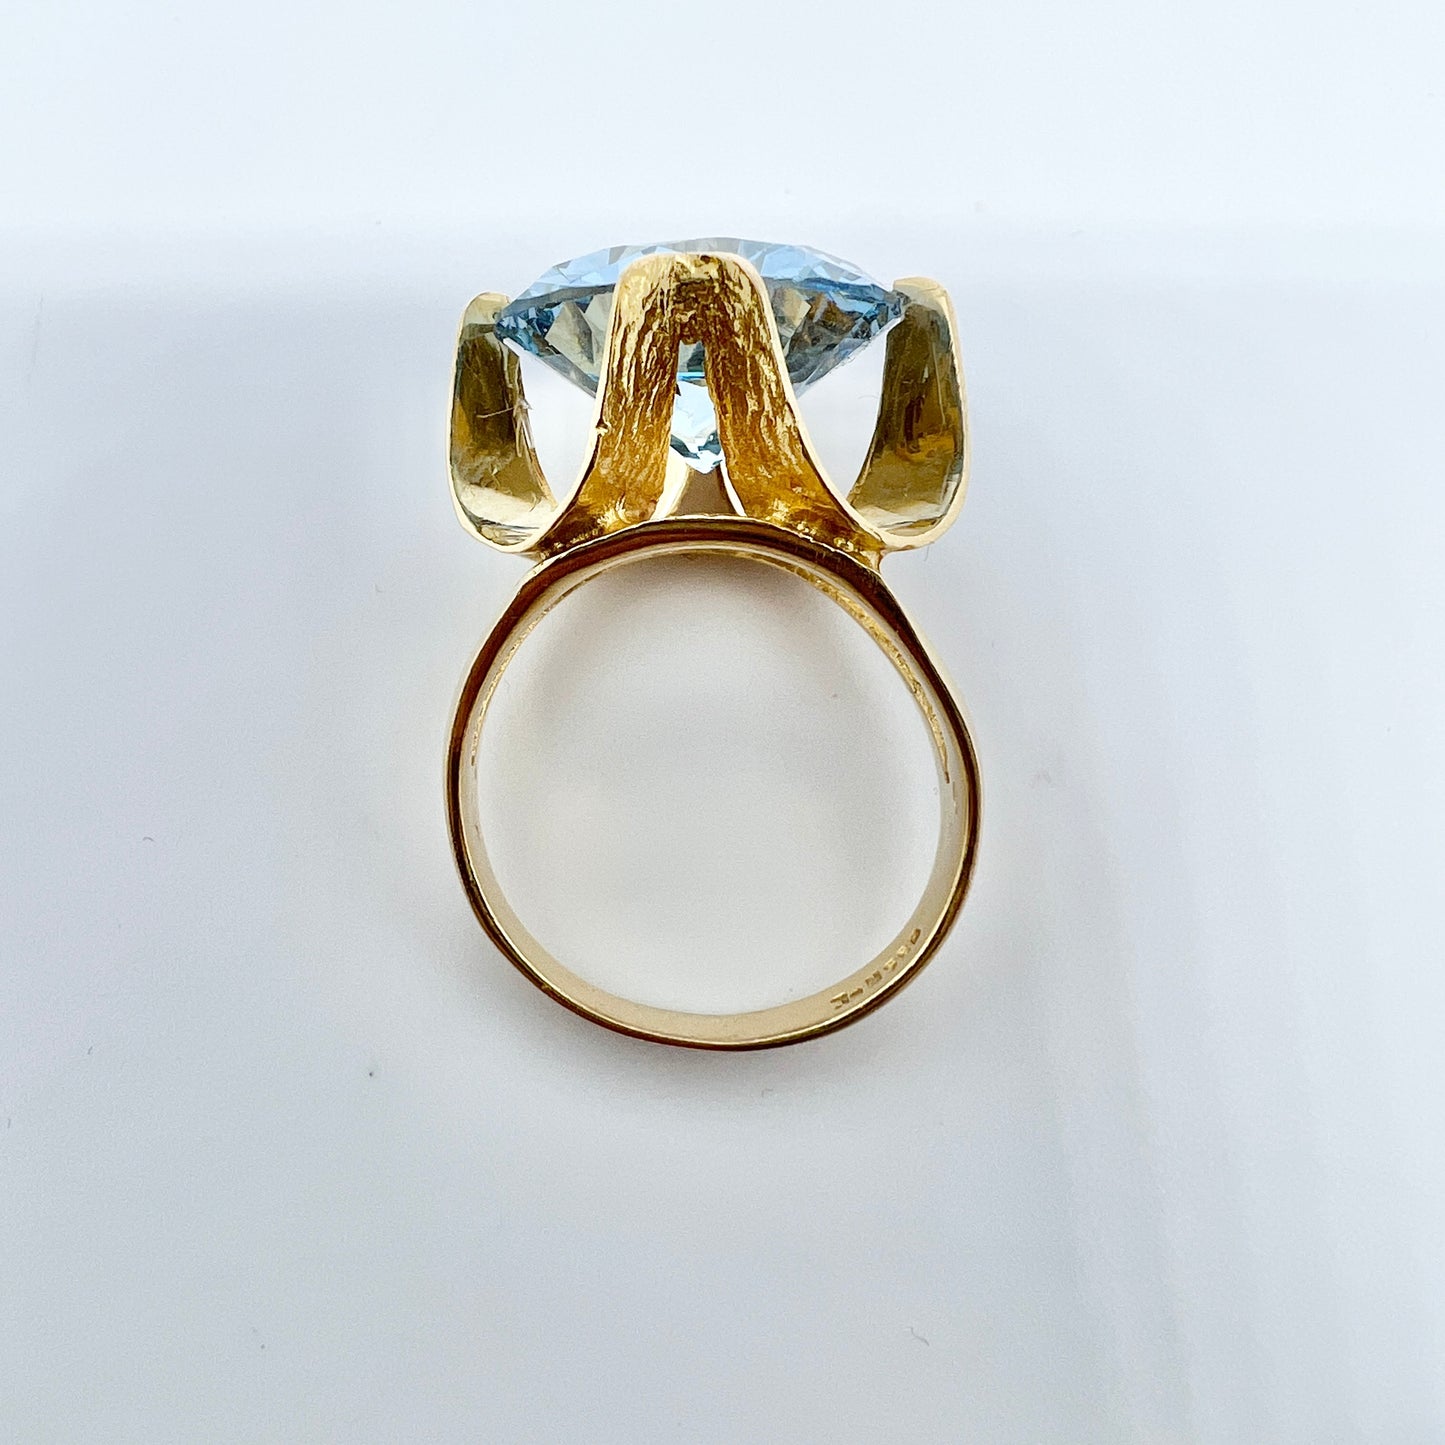 Vintage 1960s. Bold 18k Gold Icy Blue Synthetic Spinel Ring.